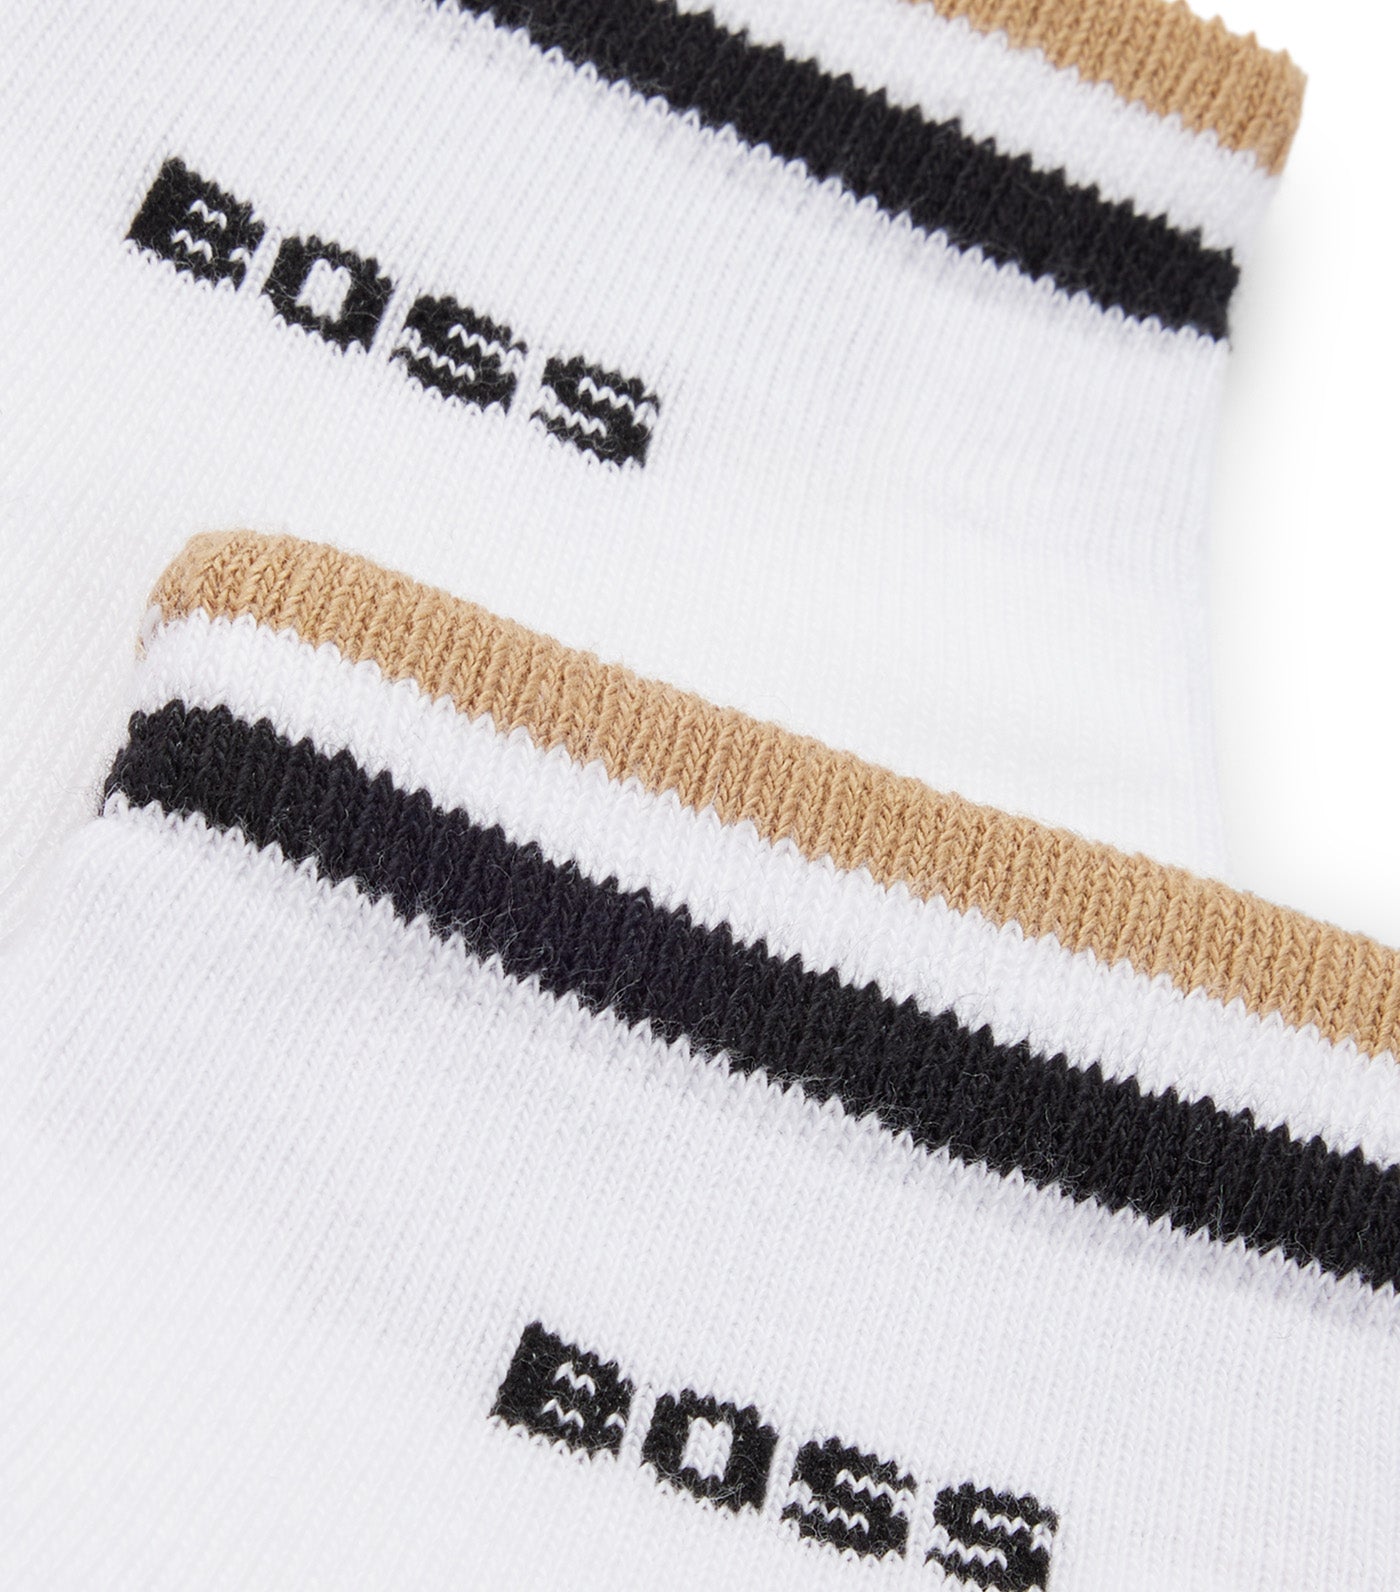 Two-Pack of Short-Length Socks with Signature Stripe White